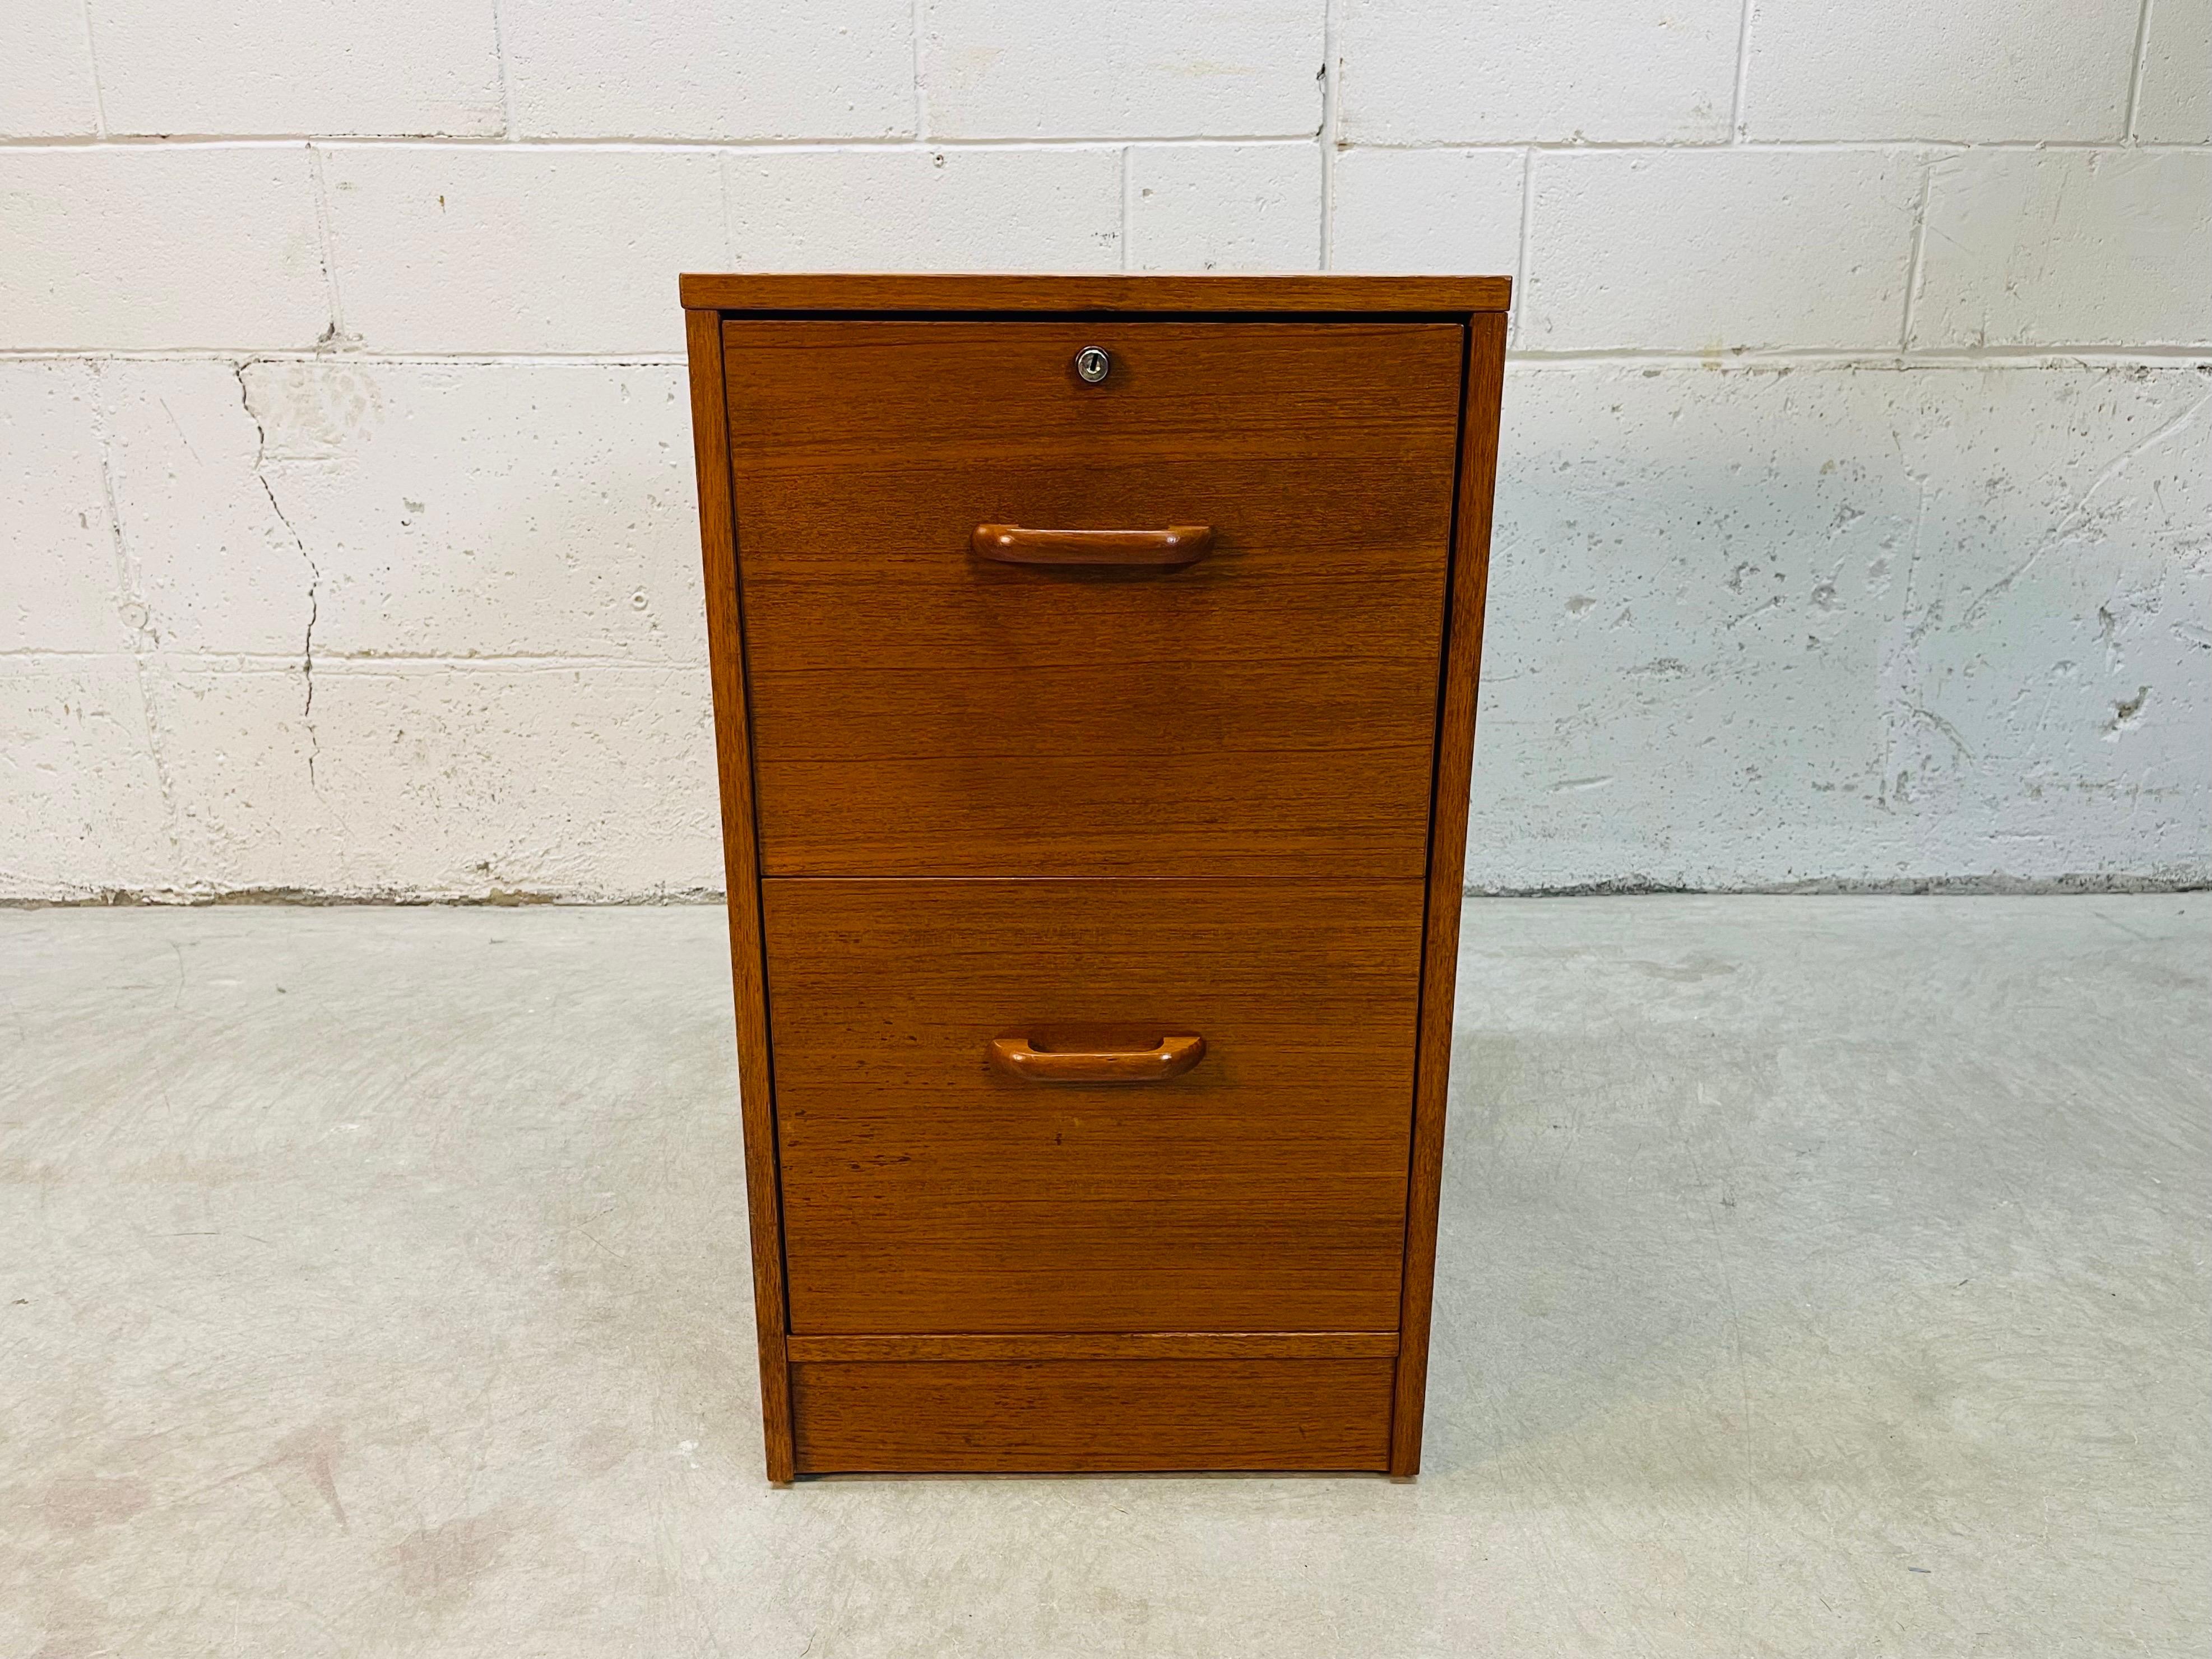 Vintage 1970s Danish teak wood two drawer filing cabinet. The drawers hold 12” size file folders. Drawers open and close freely. No key for the lock. Marked inside the drawer.